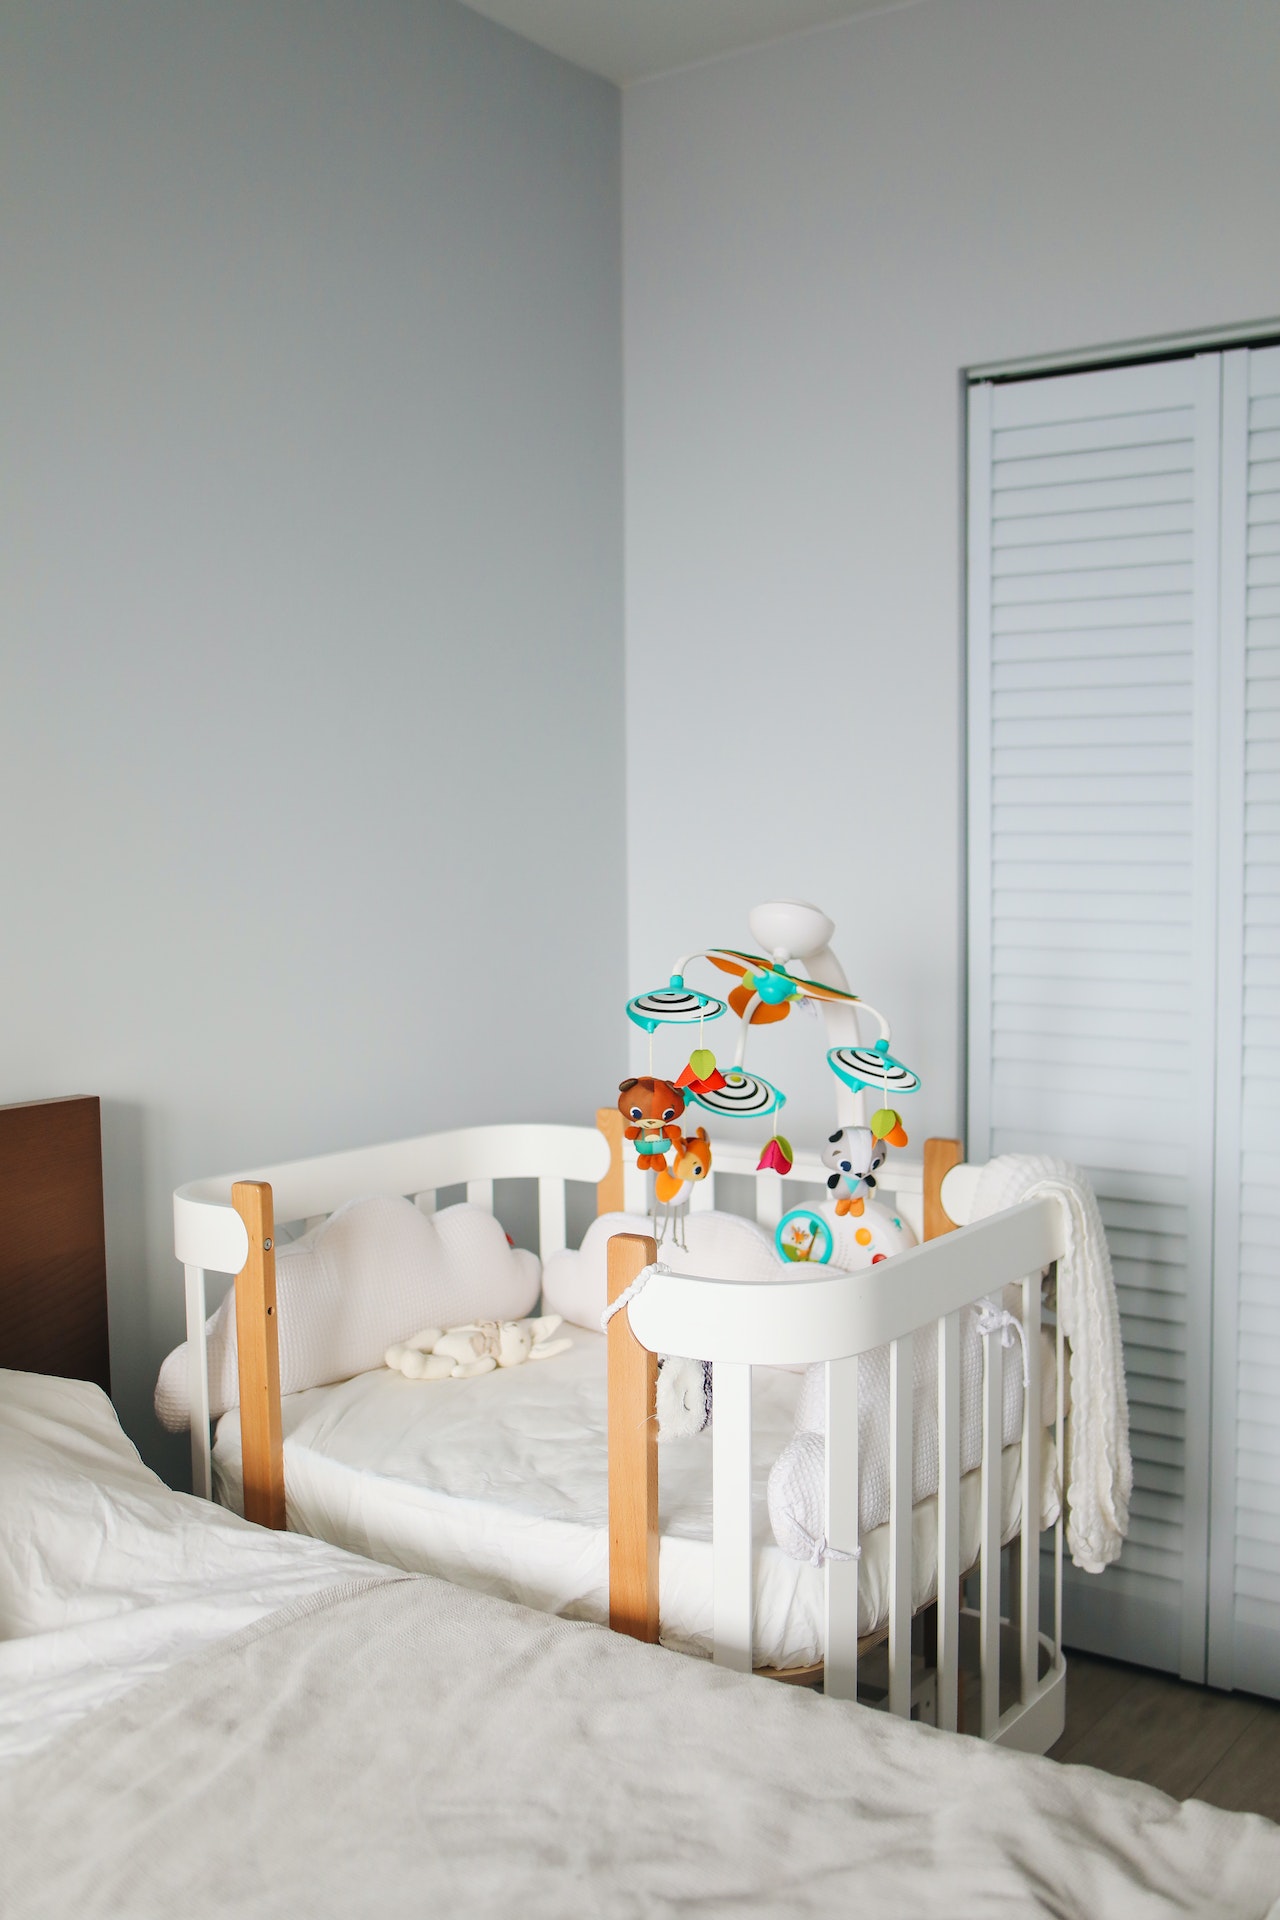 Creating a Relaxing and Calming Ambiance in the Nursery: A Serene Space for Your Baby’s Comfort